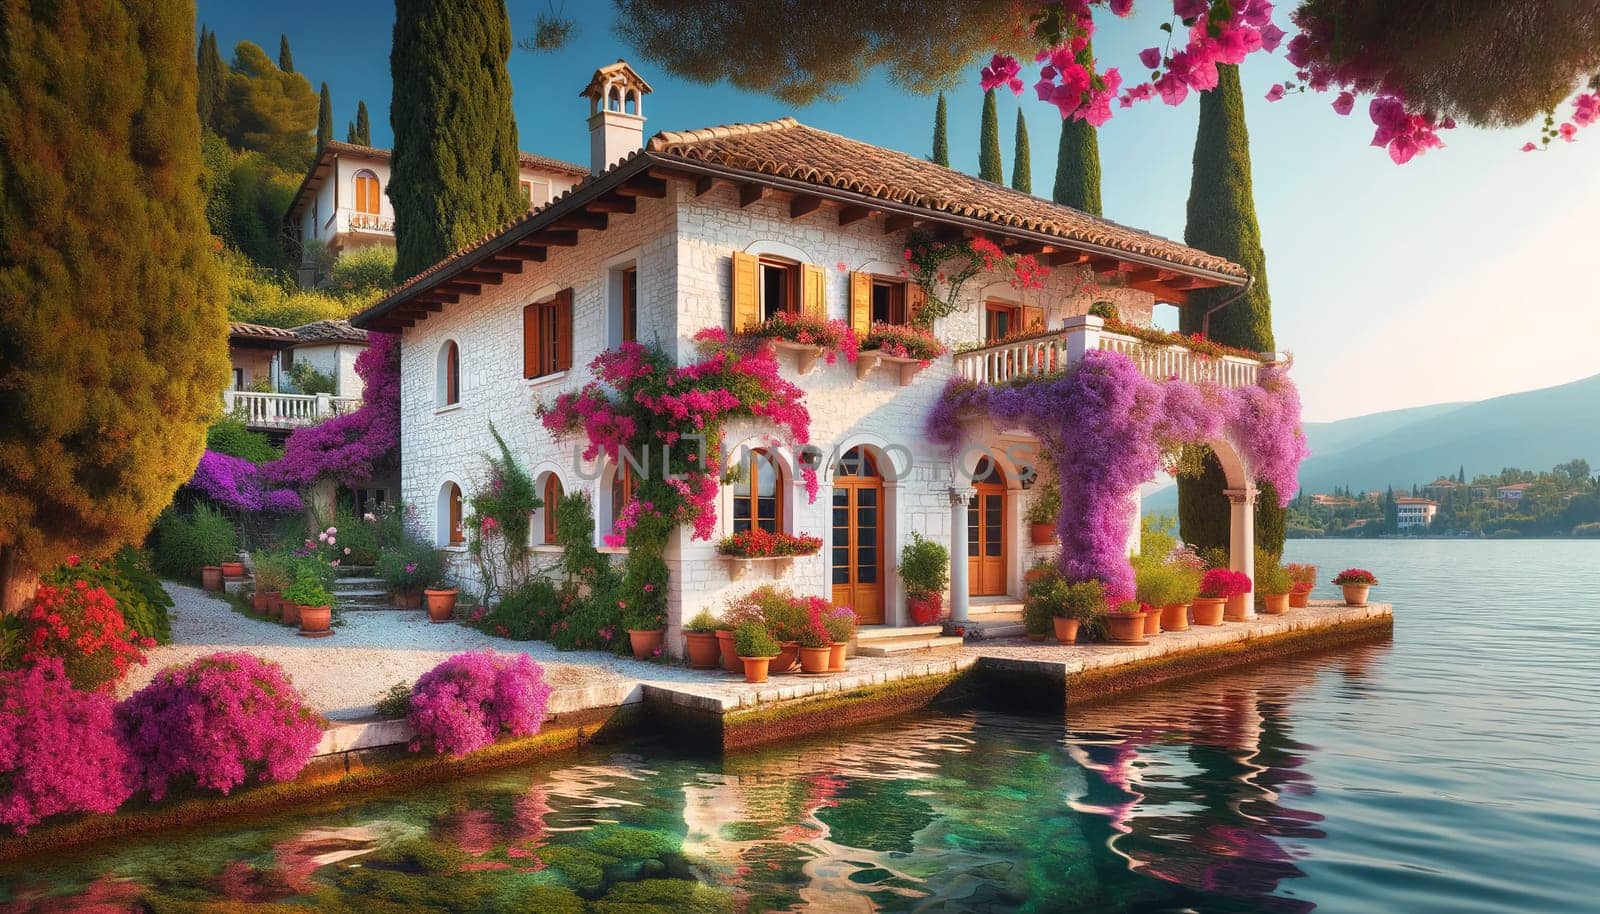 Mediterranean house with flowering ornamental plants on the shore of a lake.